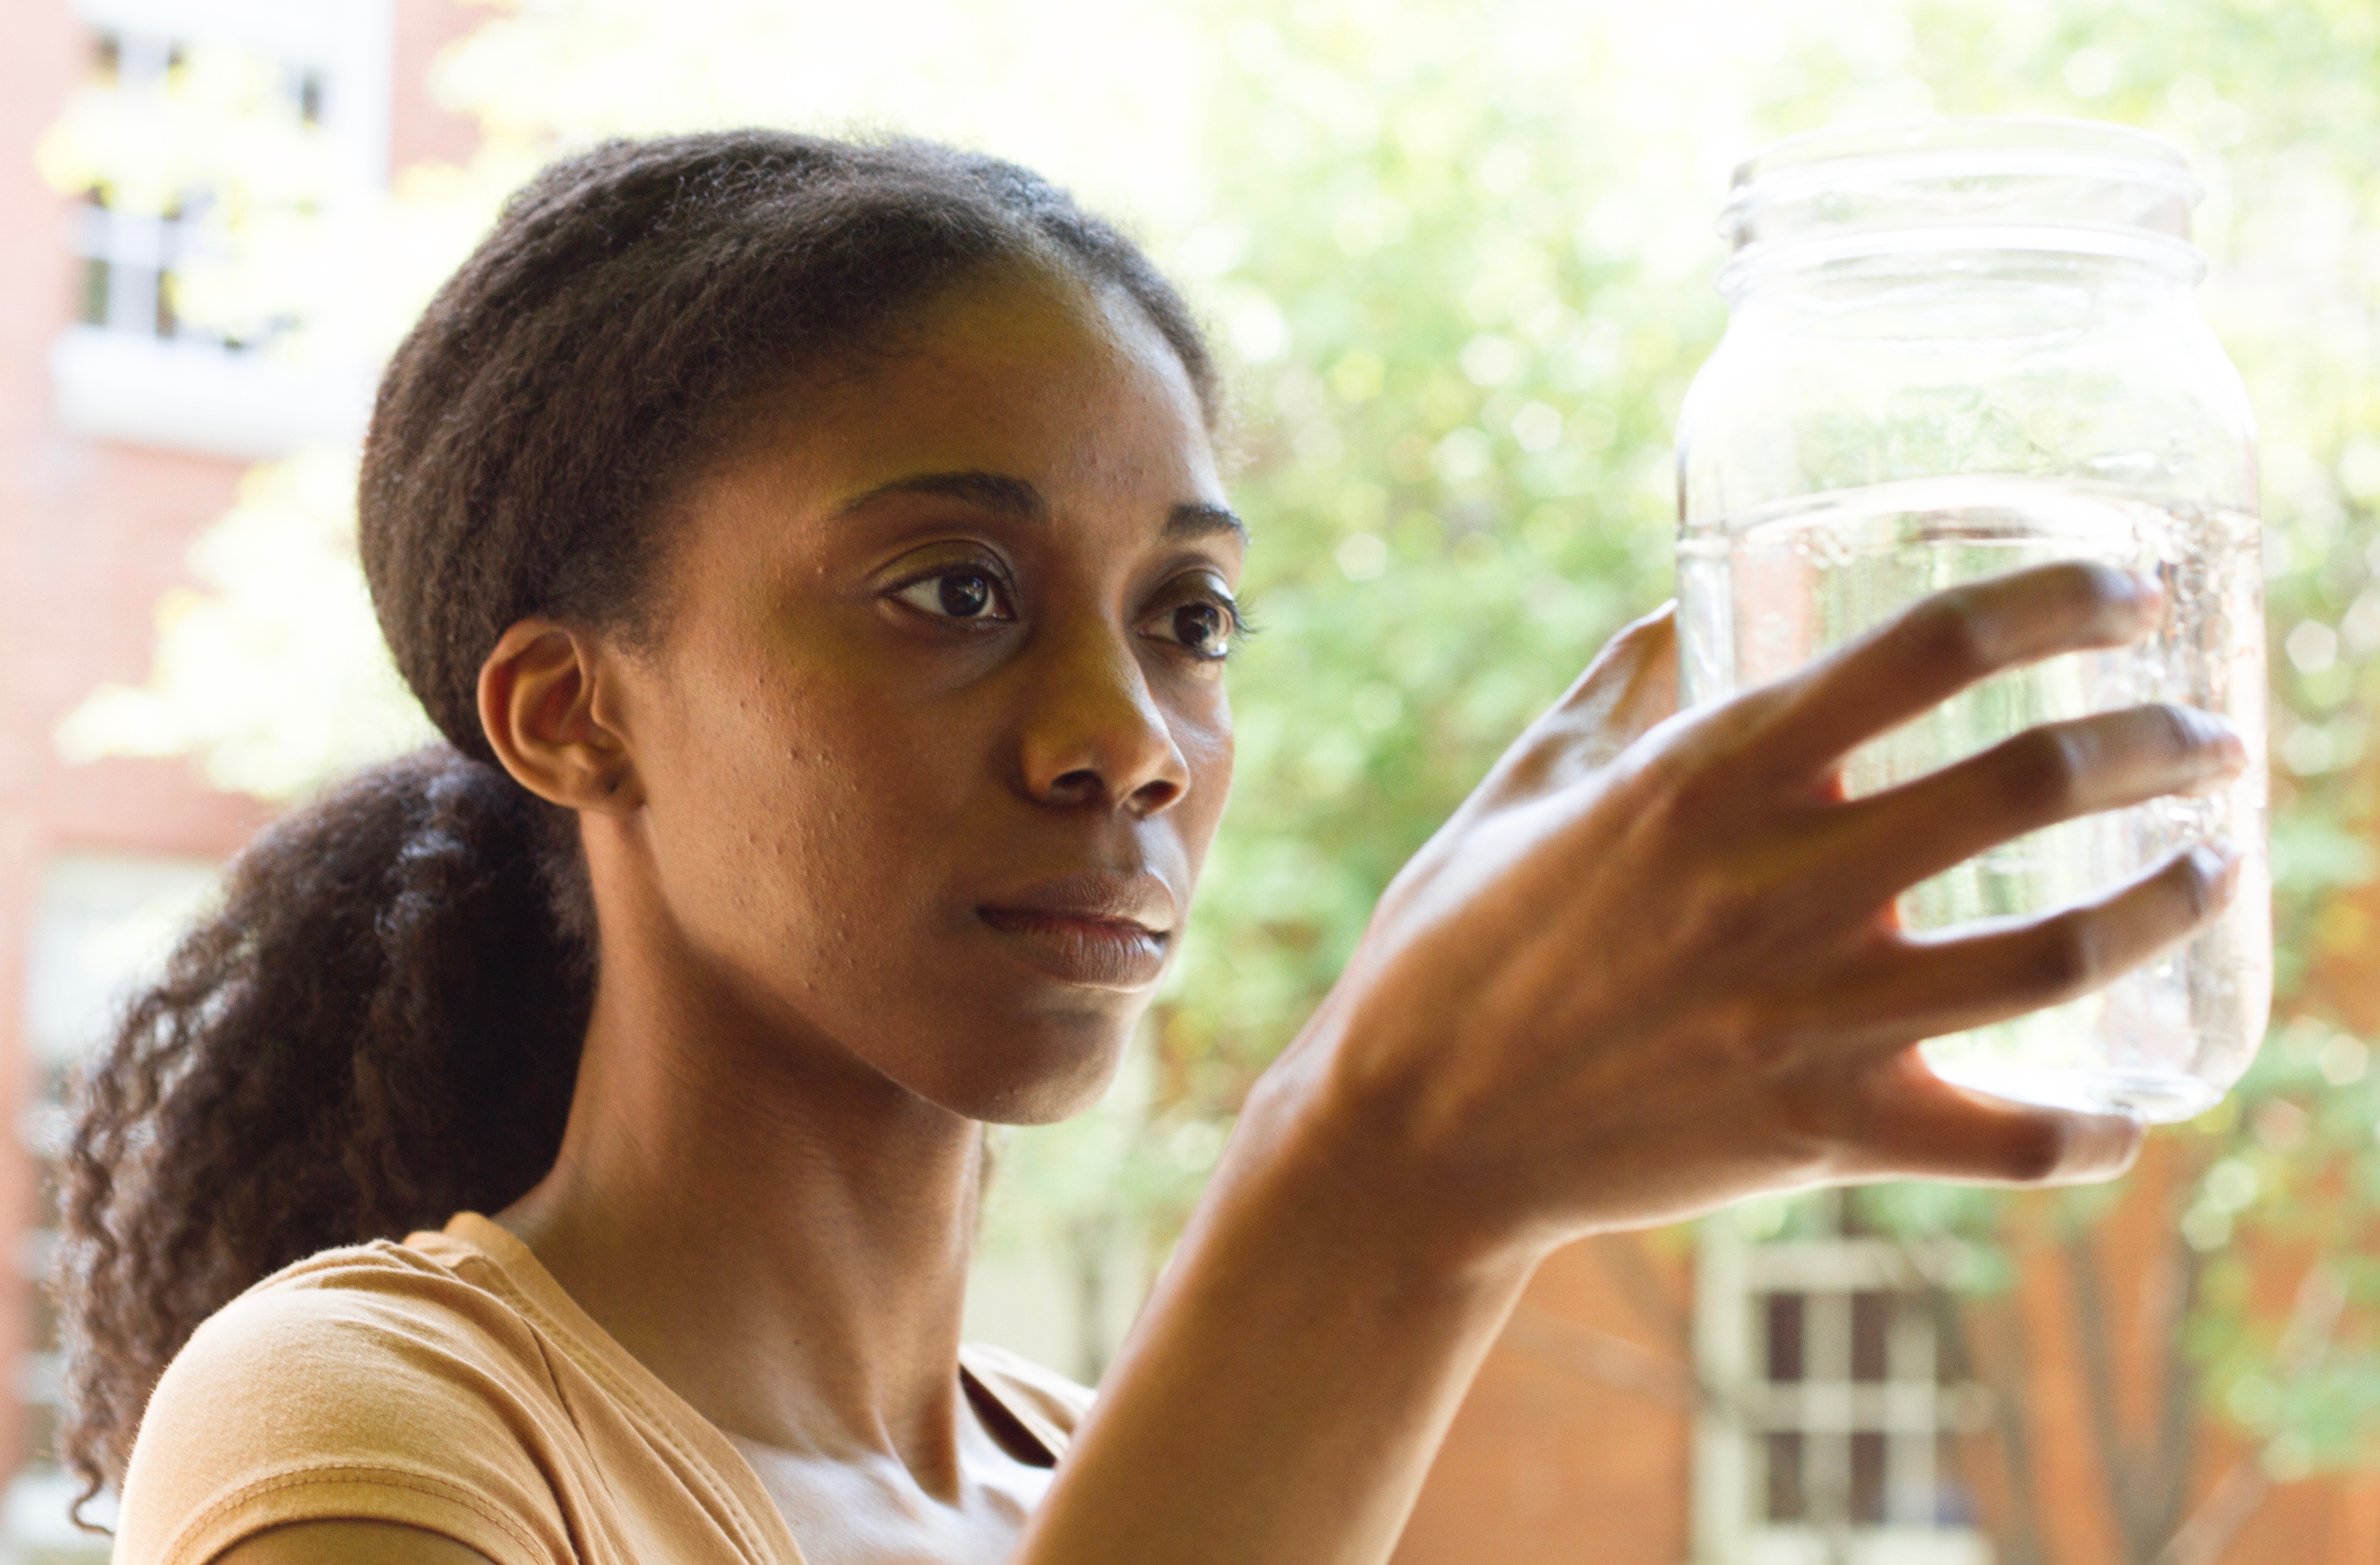 The glass is more than half full, but of what? Sierra (Siovhan Christensen) contemplates the effects of fracking in "Driftless."